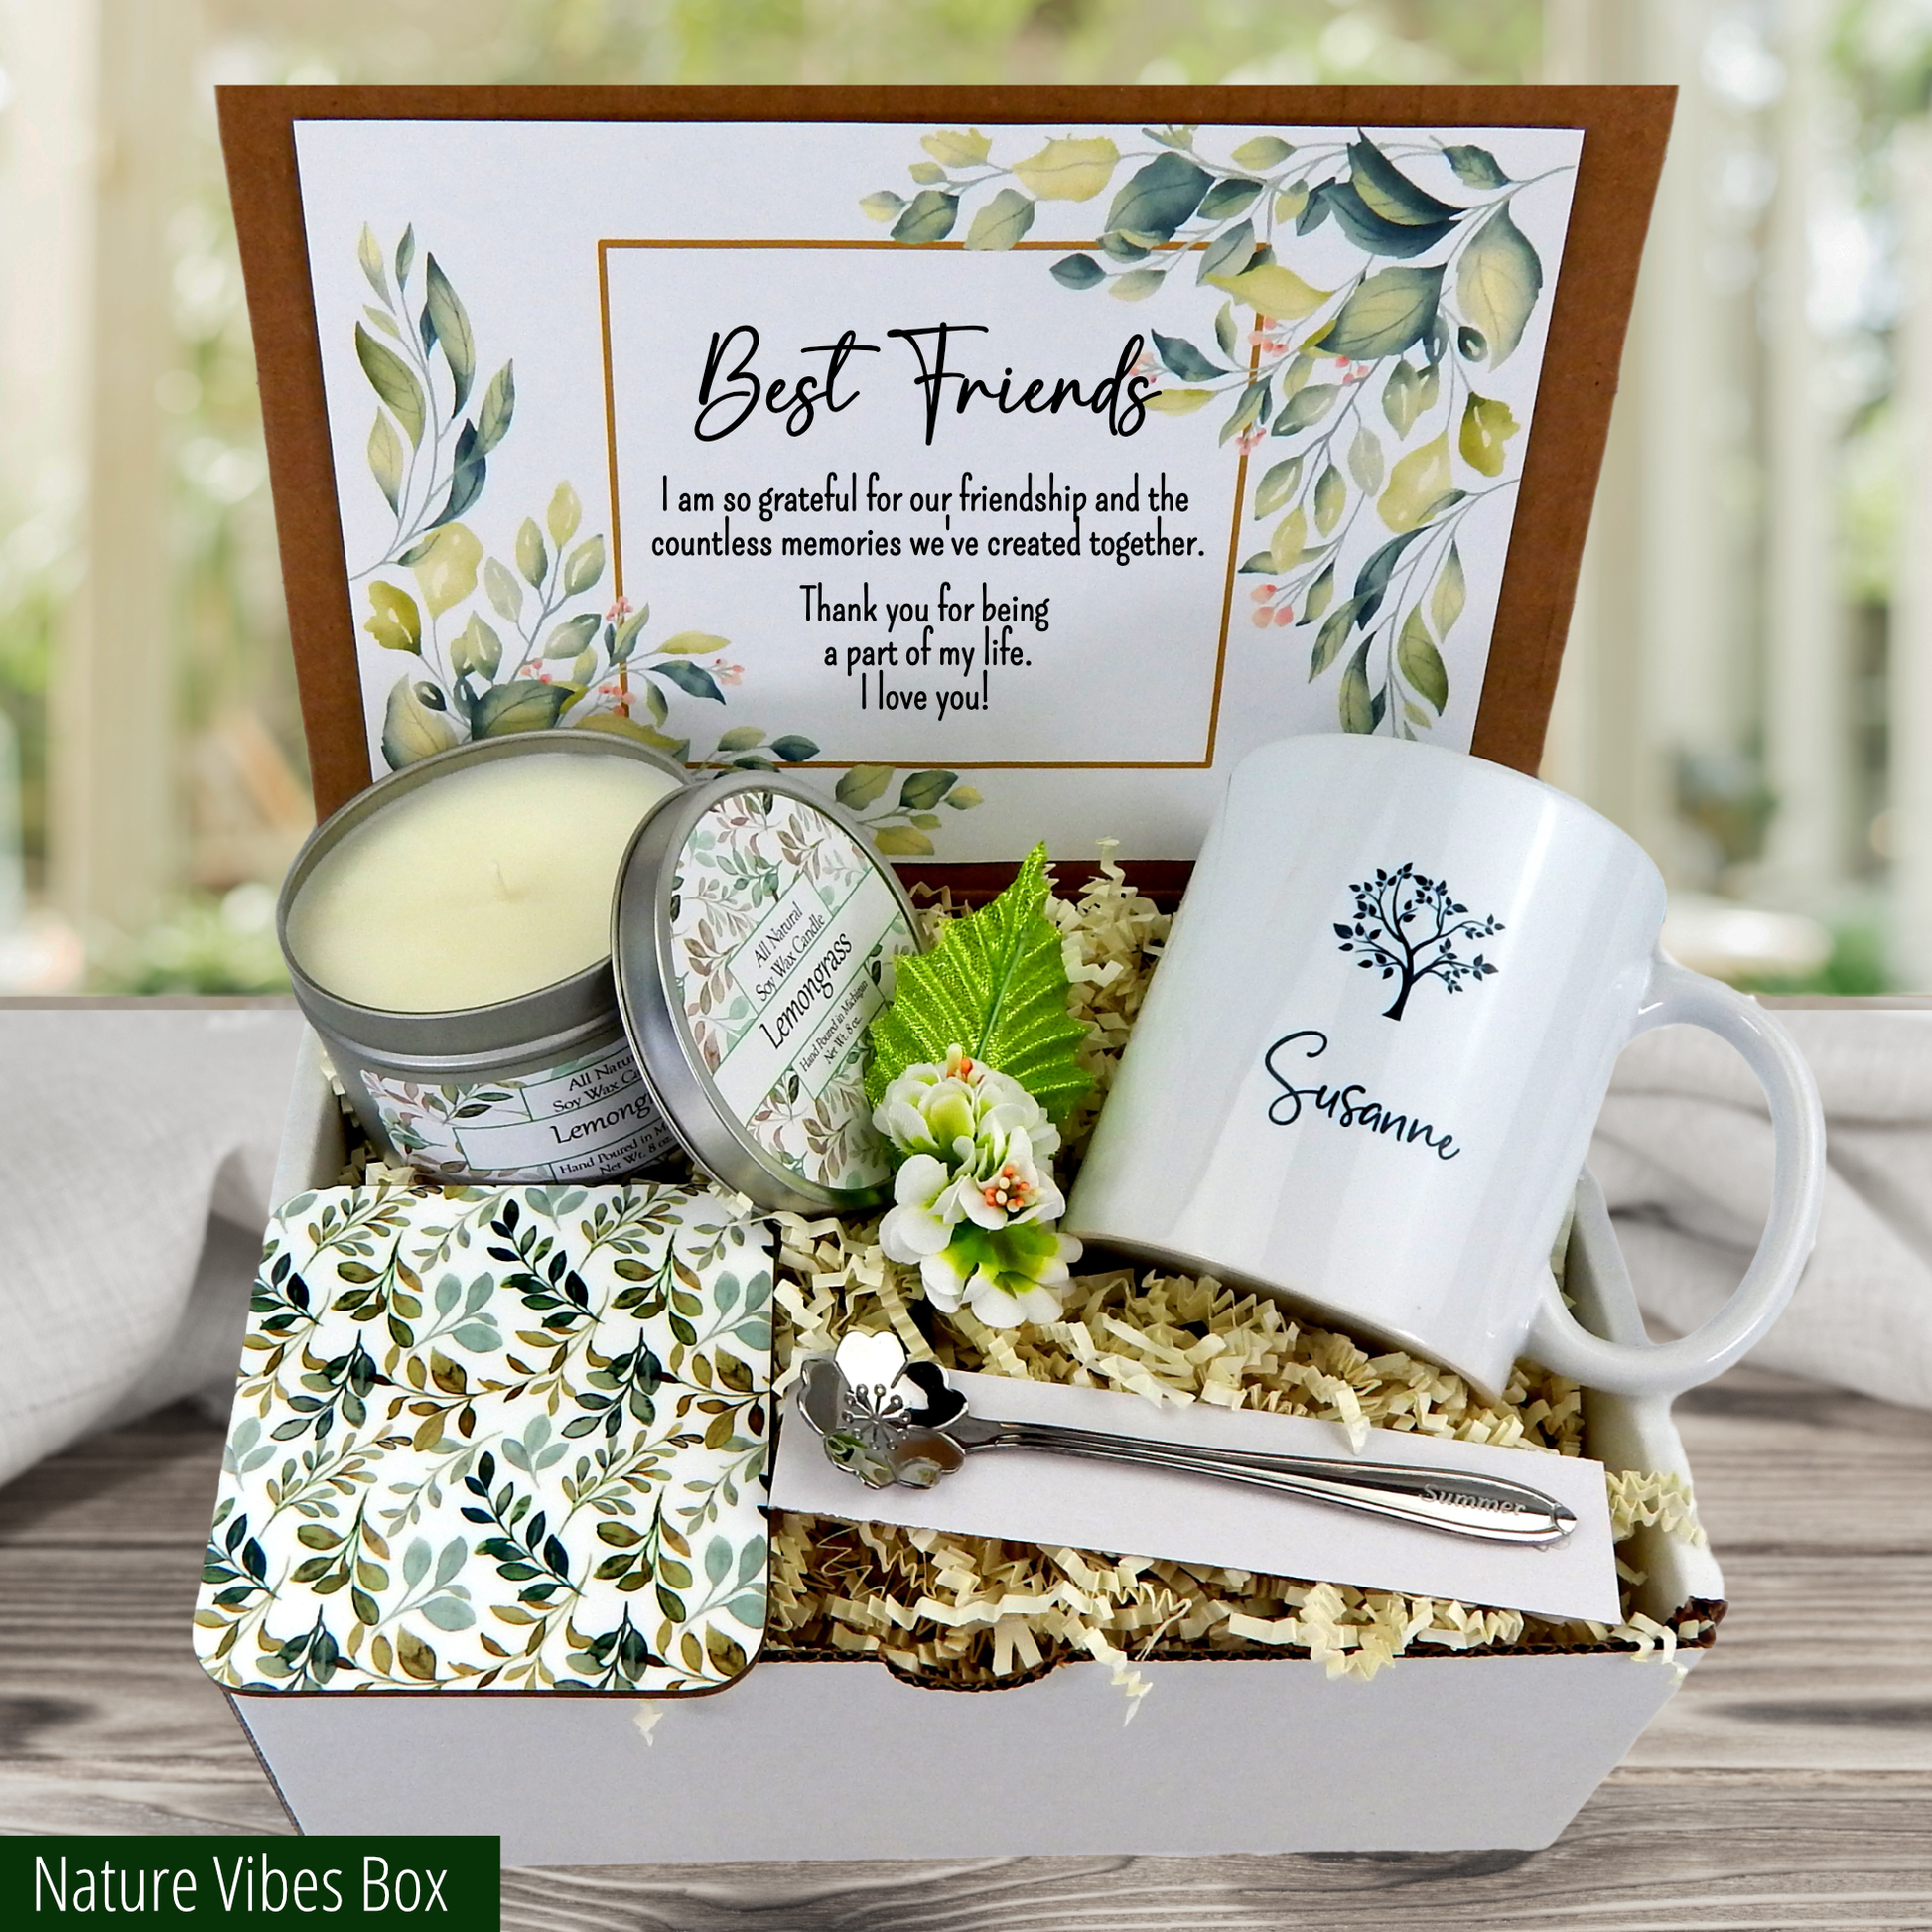 Show Your Bestie Some Love with a Thoughtful Gift Basket